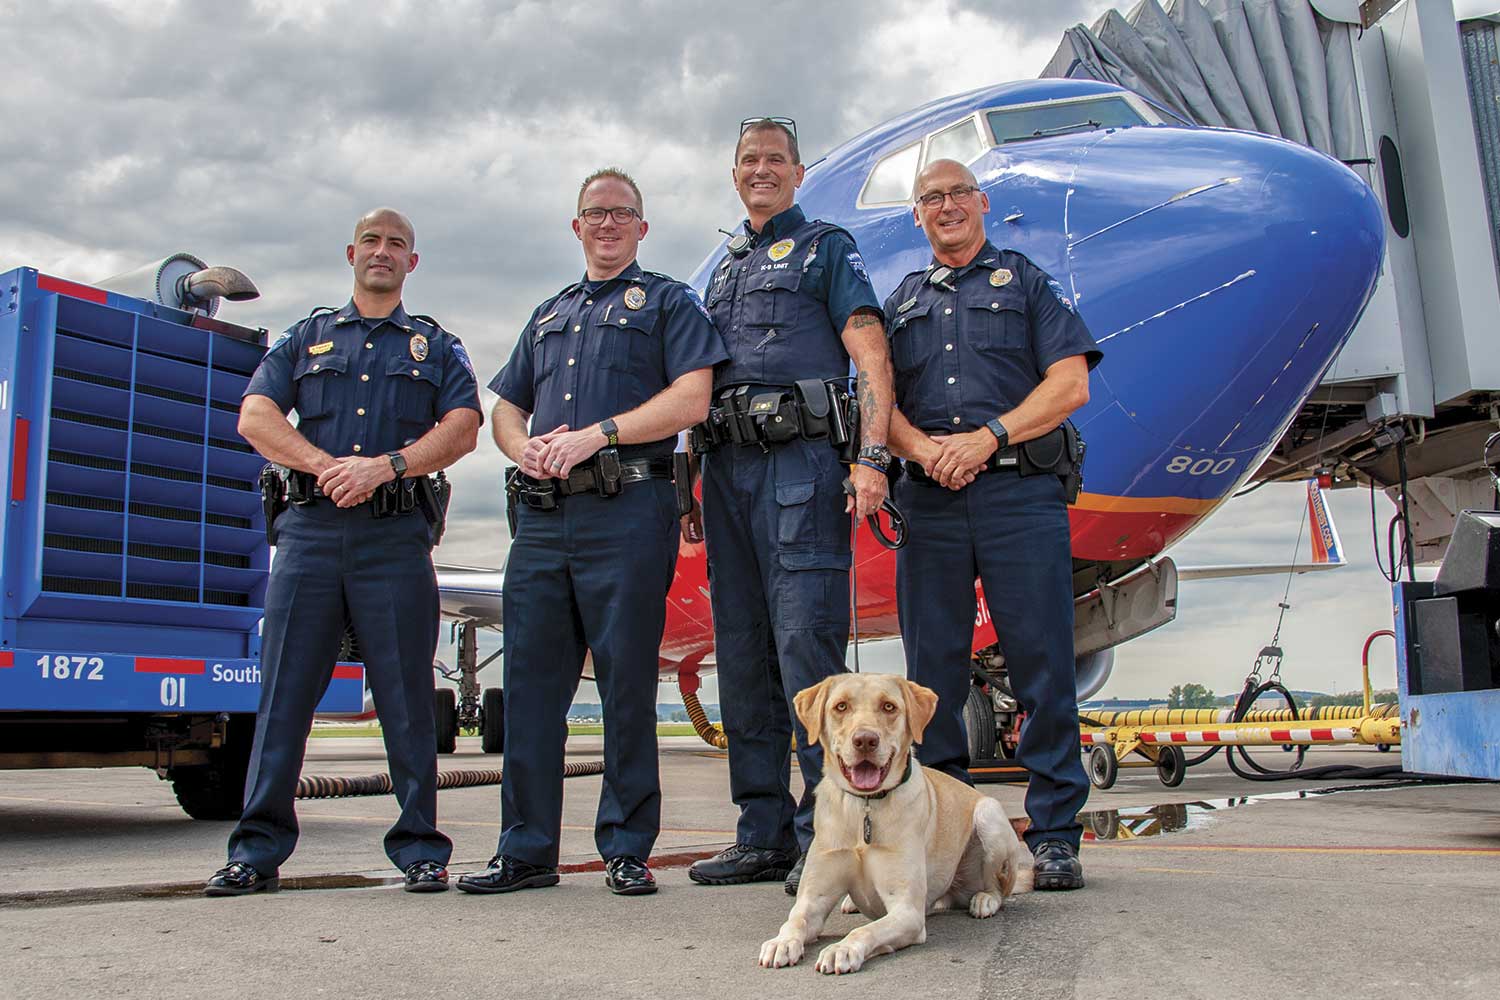  From left-to-right, Maj. Dustin Flannery, Chief Josh Ball, Officer Peter Lamb, K9 Raj and Officer Jeff Rogers pose in front of a Southwest Airlines plane on the tarmac at the Louisville International Airport. (Photo by Jim Robertson) 